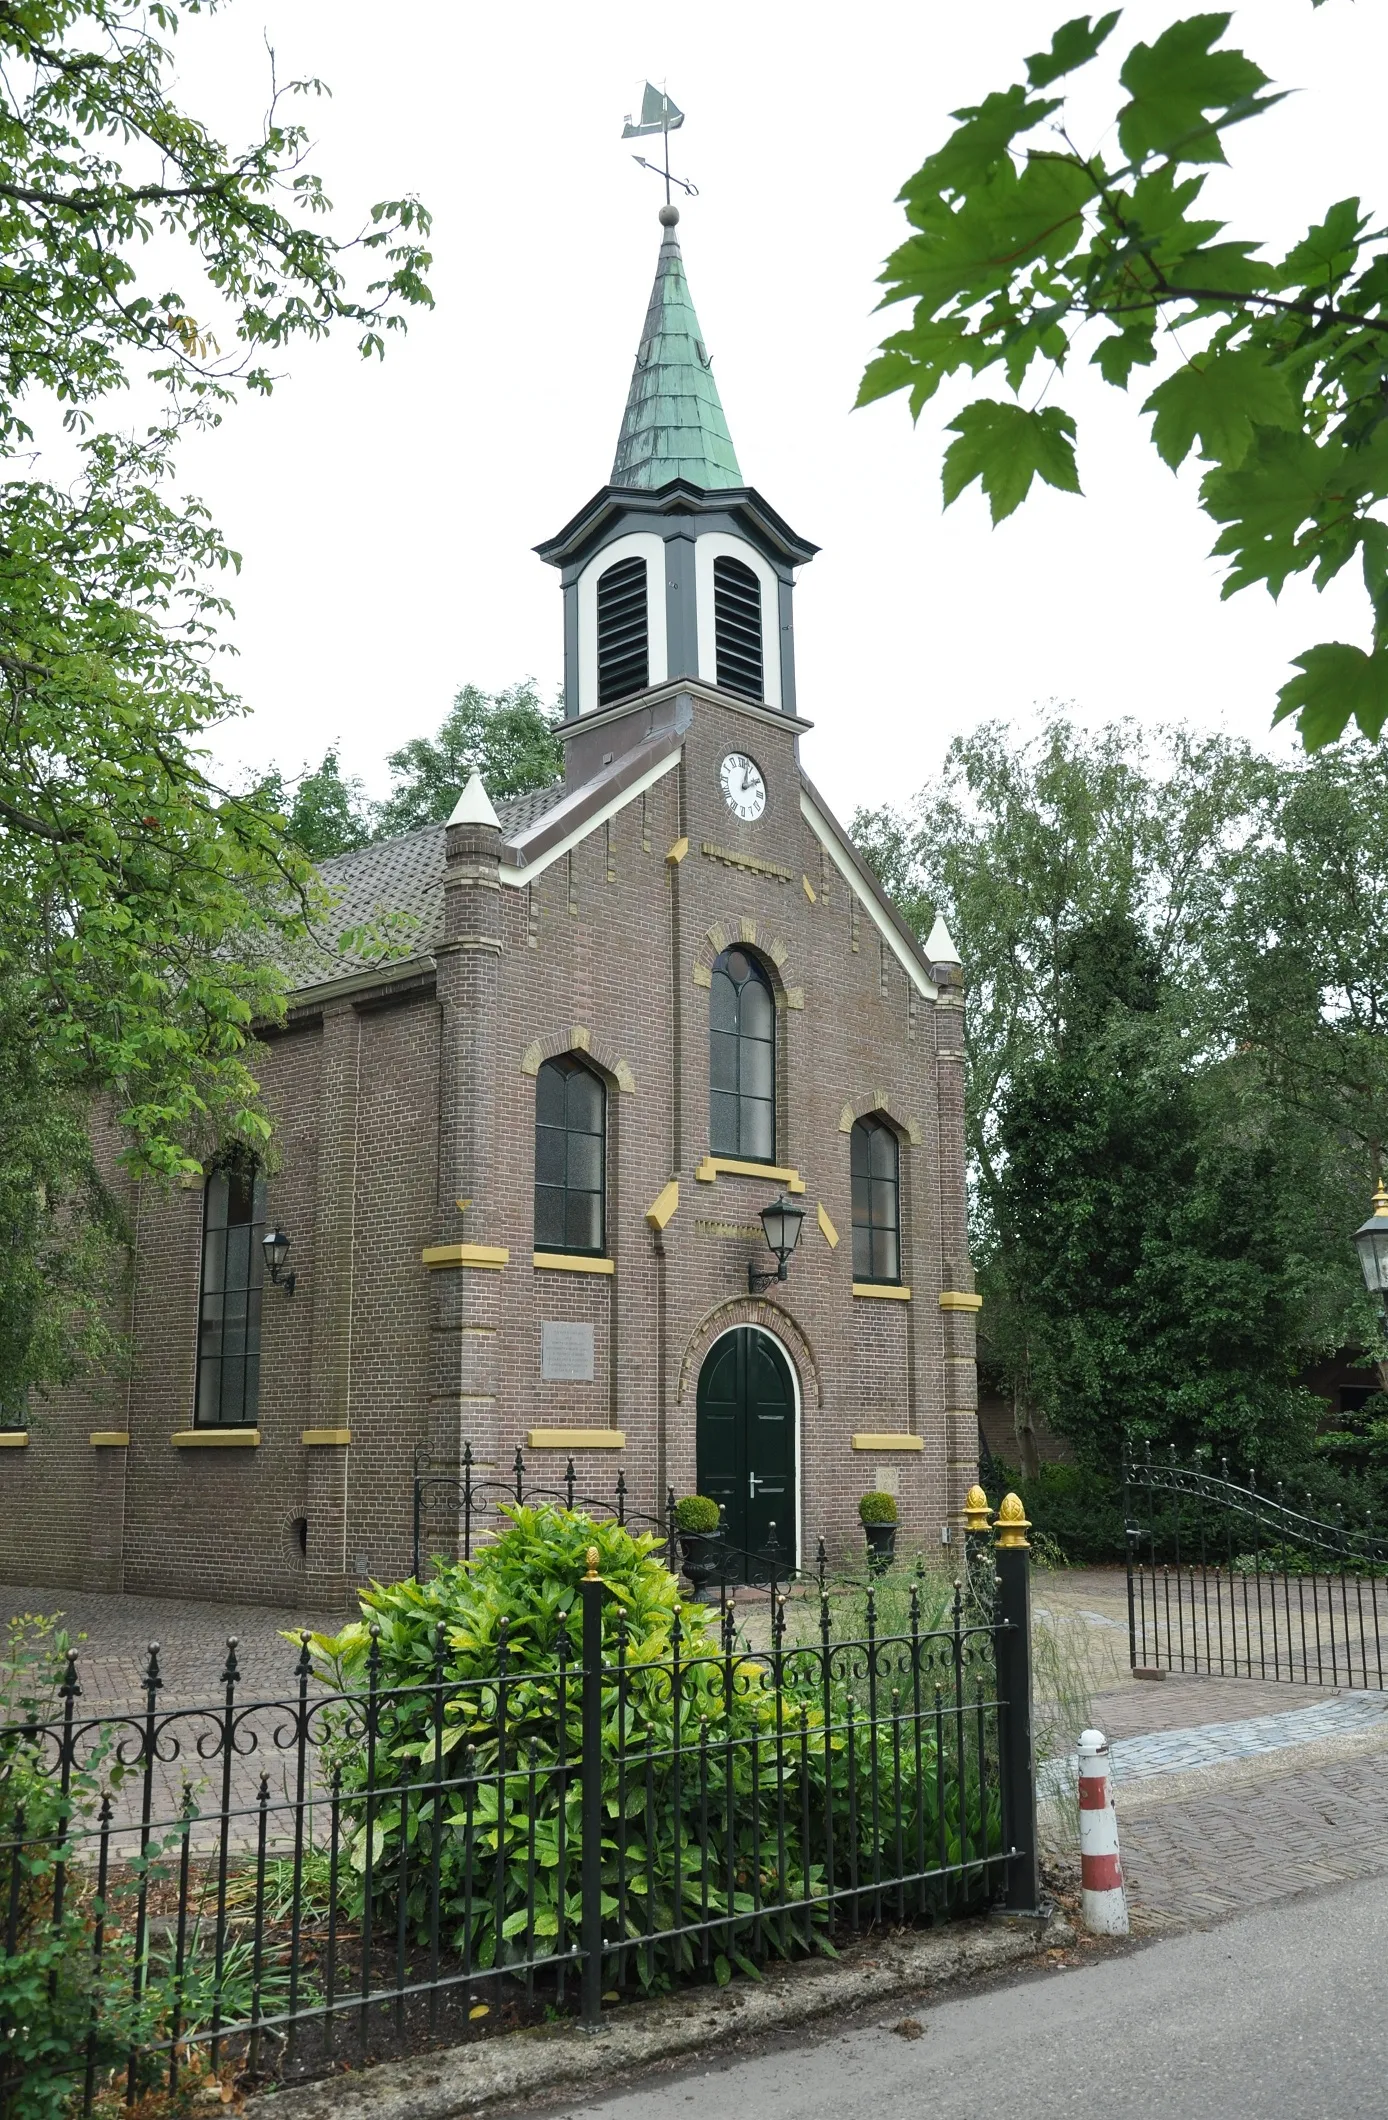 Photo showing: The Protestant church in Kaag (village) dates from 1873-74 (municipality Kaag en Braassem, Province South Holland, Netherlands). The village lies on an island in the Kaag Lakes.